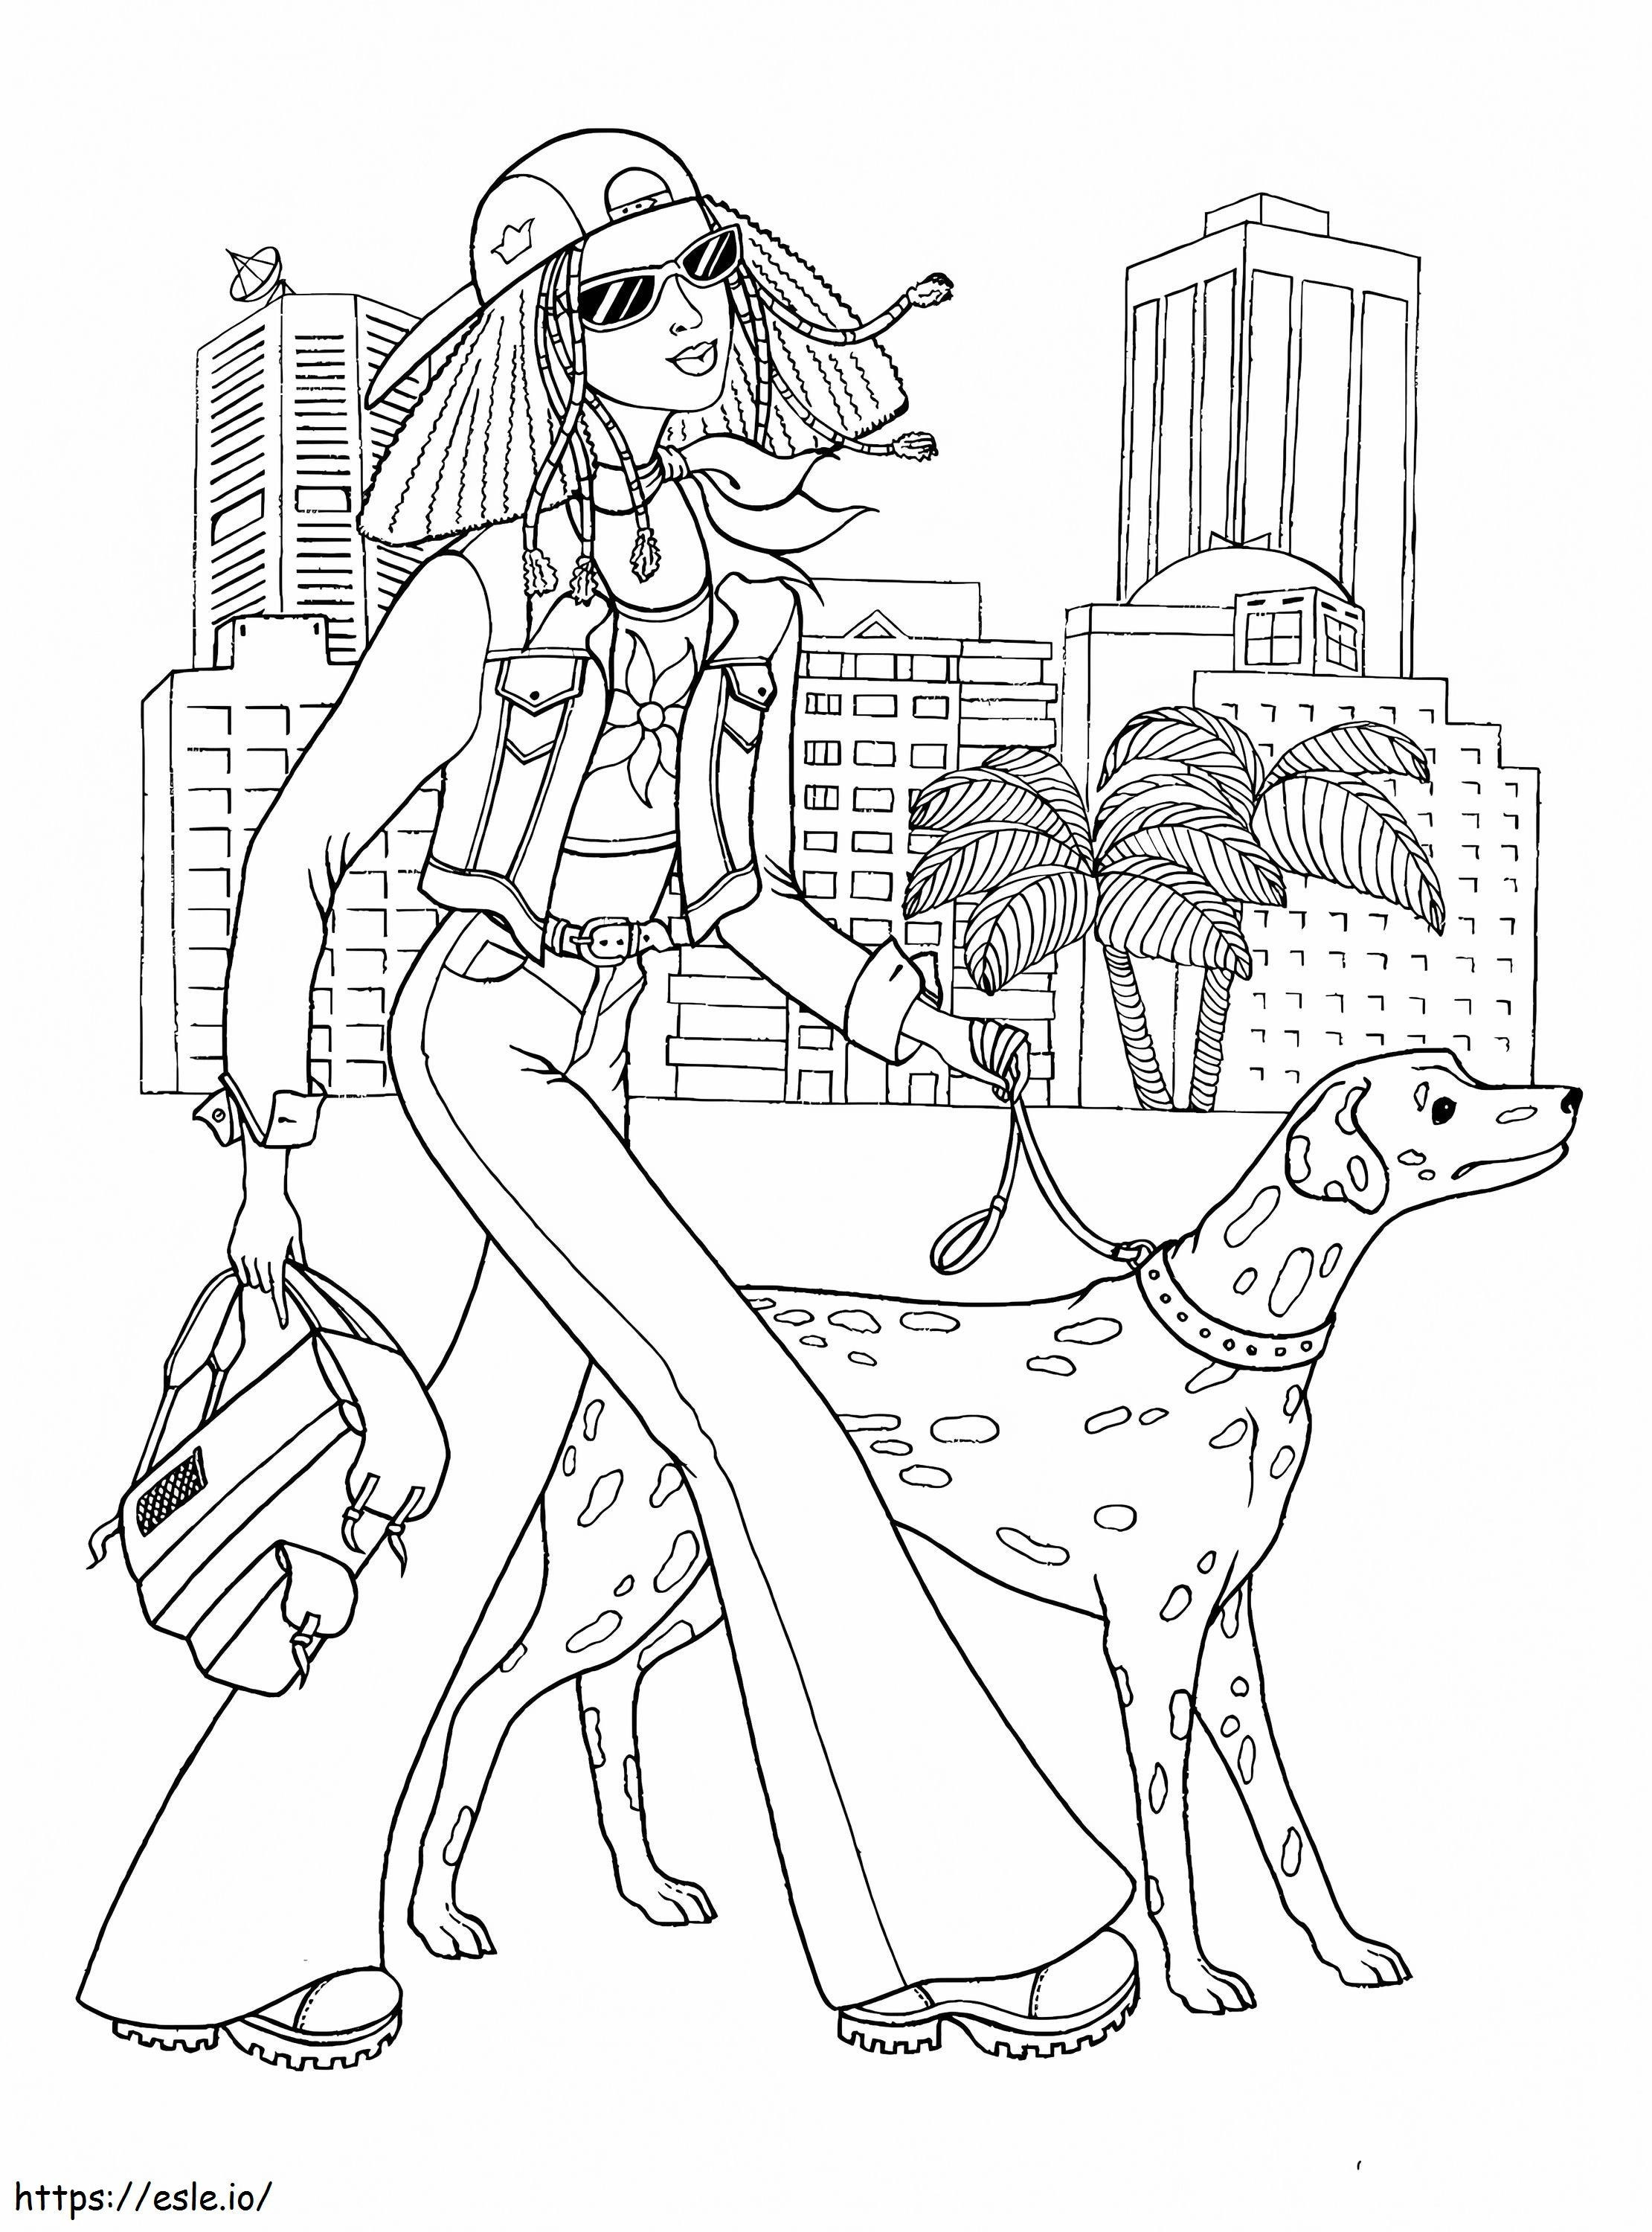 1572827793 Teenager Fashion coloring page